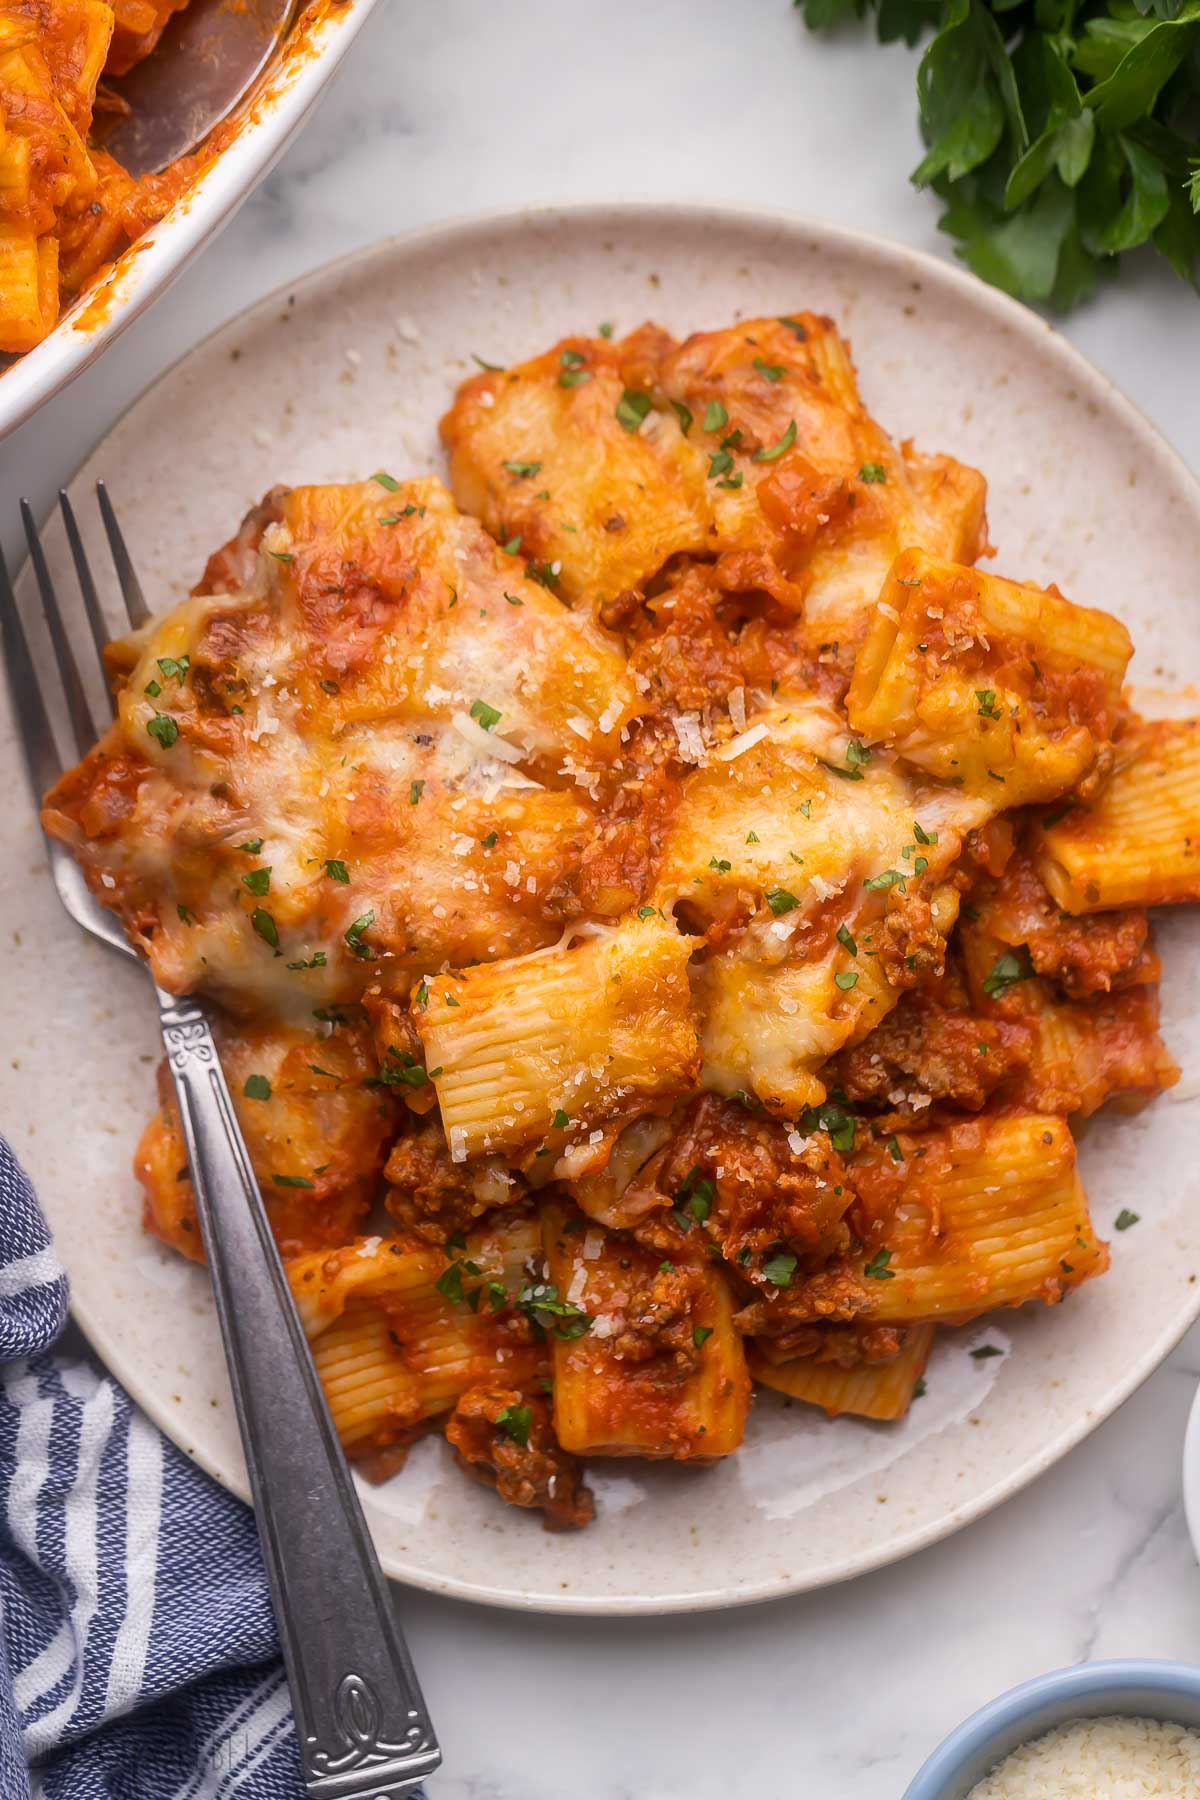 plate filled with rigatoni pasta bake and a fork beside.